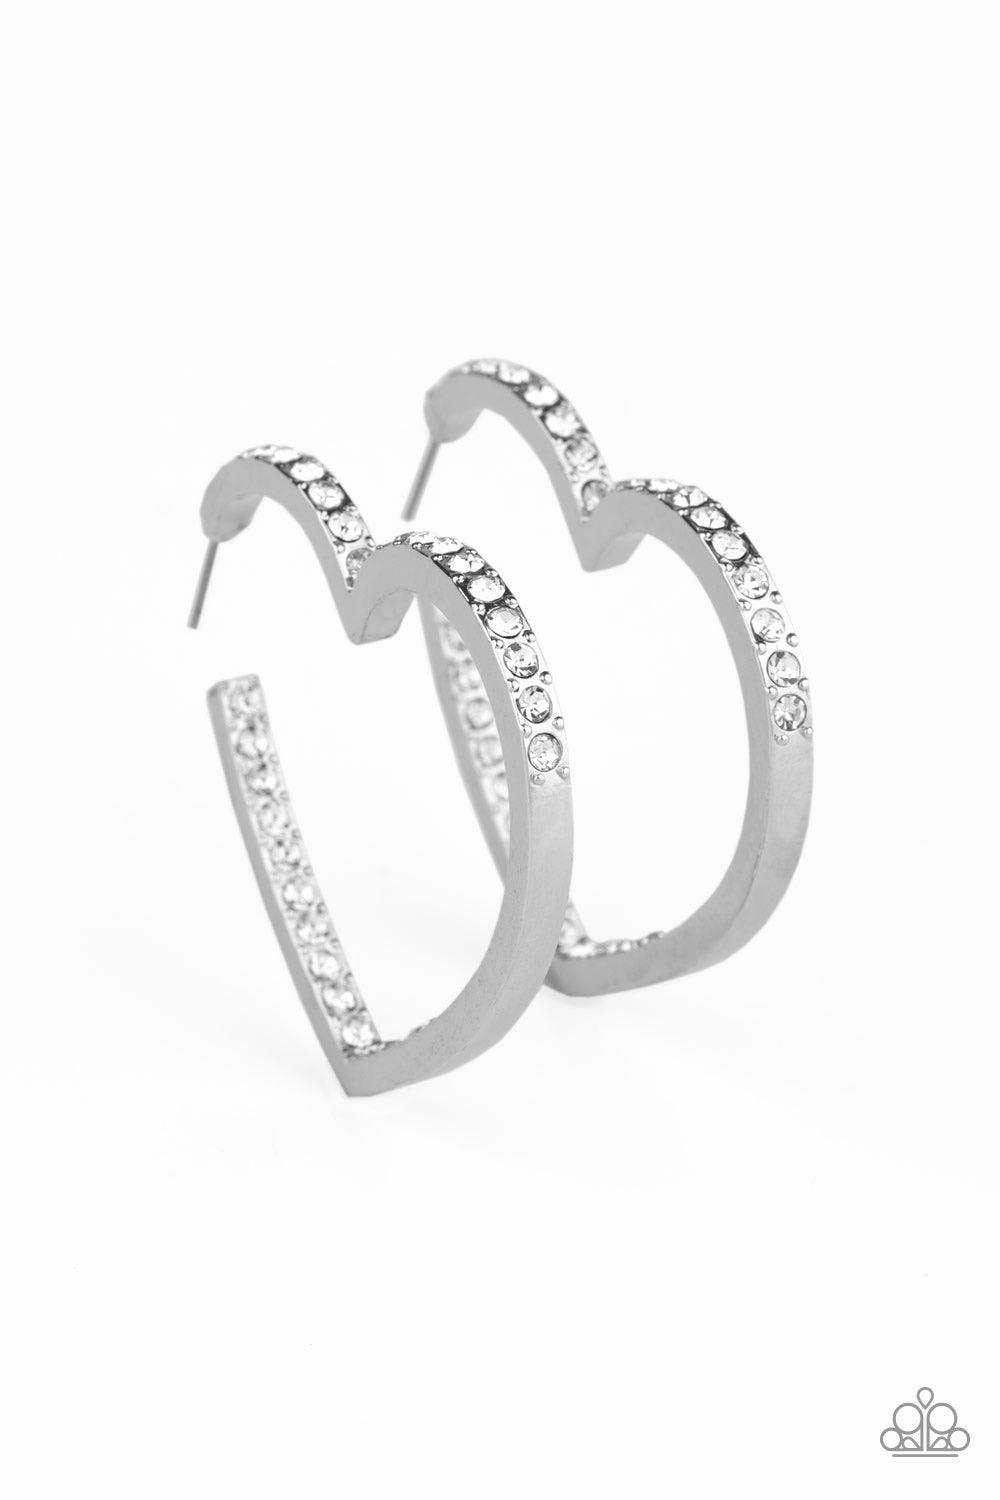 Paparazzi Accessories Heartbreaker - White Encrusted in sections of glittery white rhinestones, a glistening silver hoop curls into a charming heart shape for a heart-stopping look. Earring attaches to a standard post fitting. Hoop measures approximately